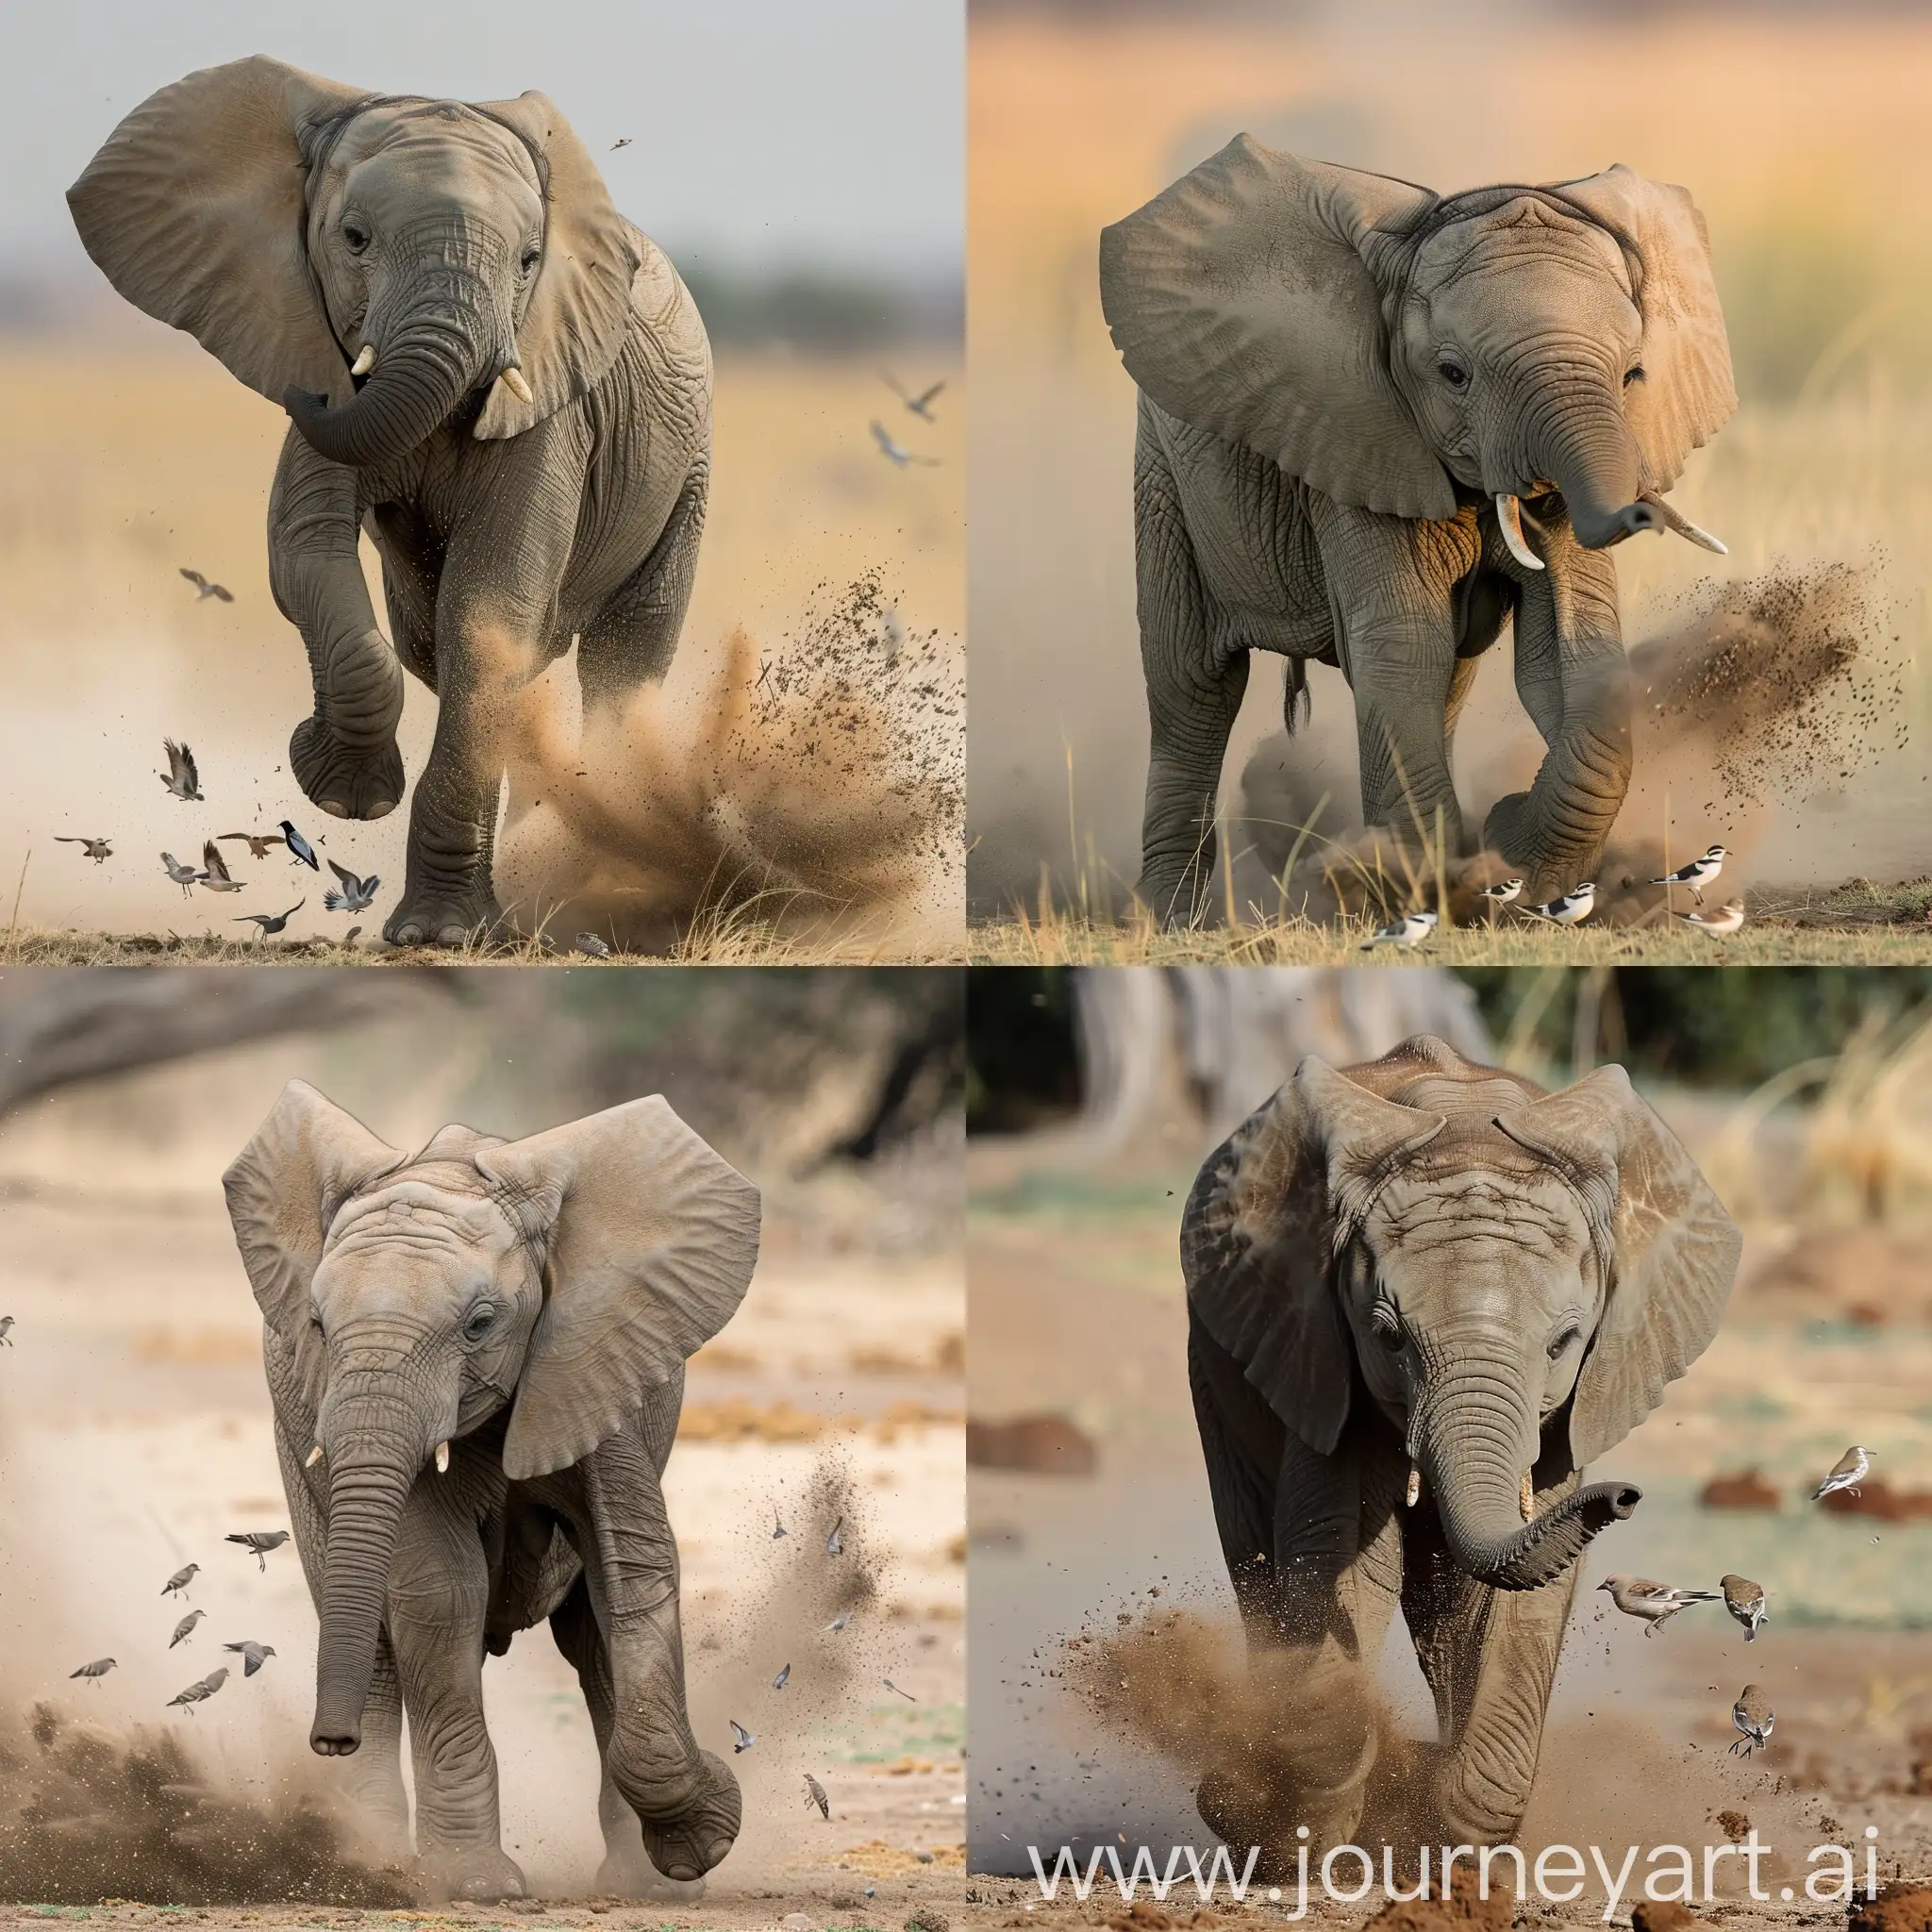 Playful-African-Elephant-Kicking-Dust-with-Birds-Scattering